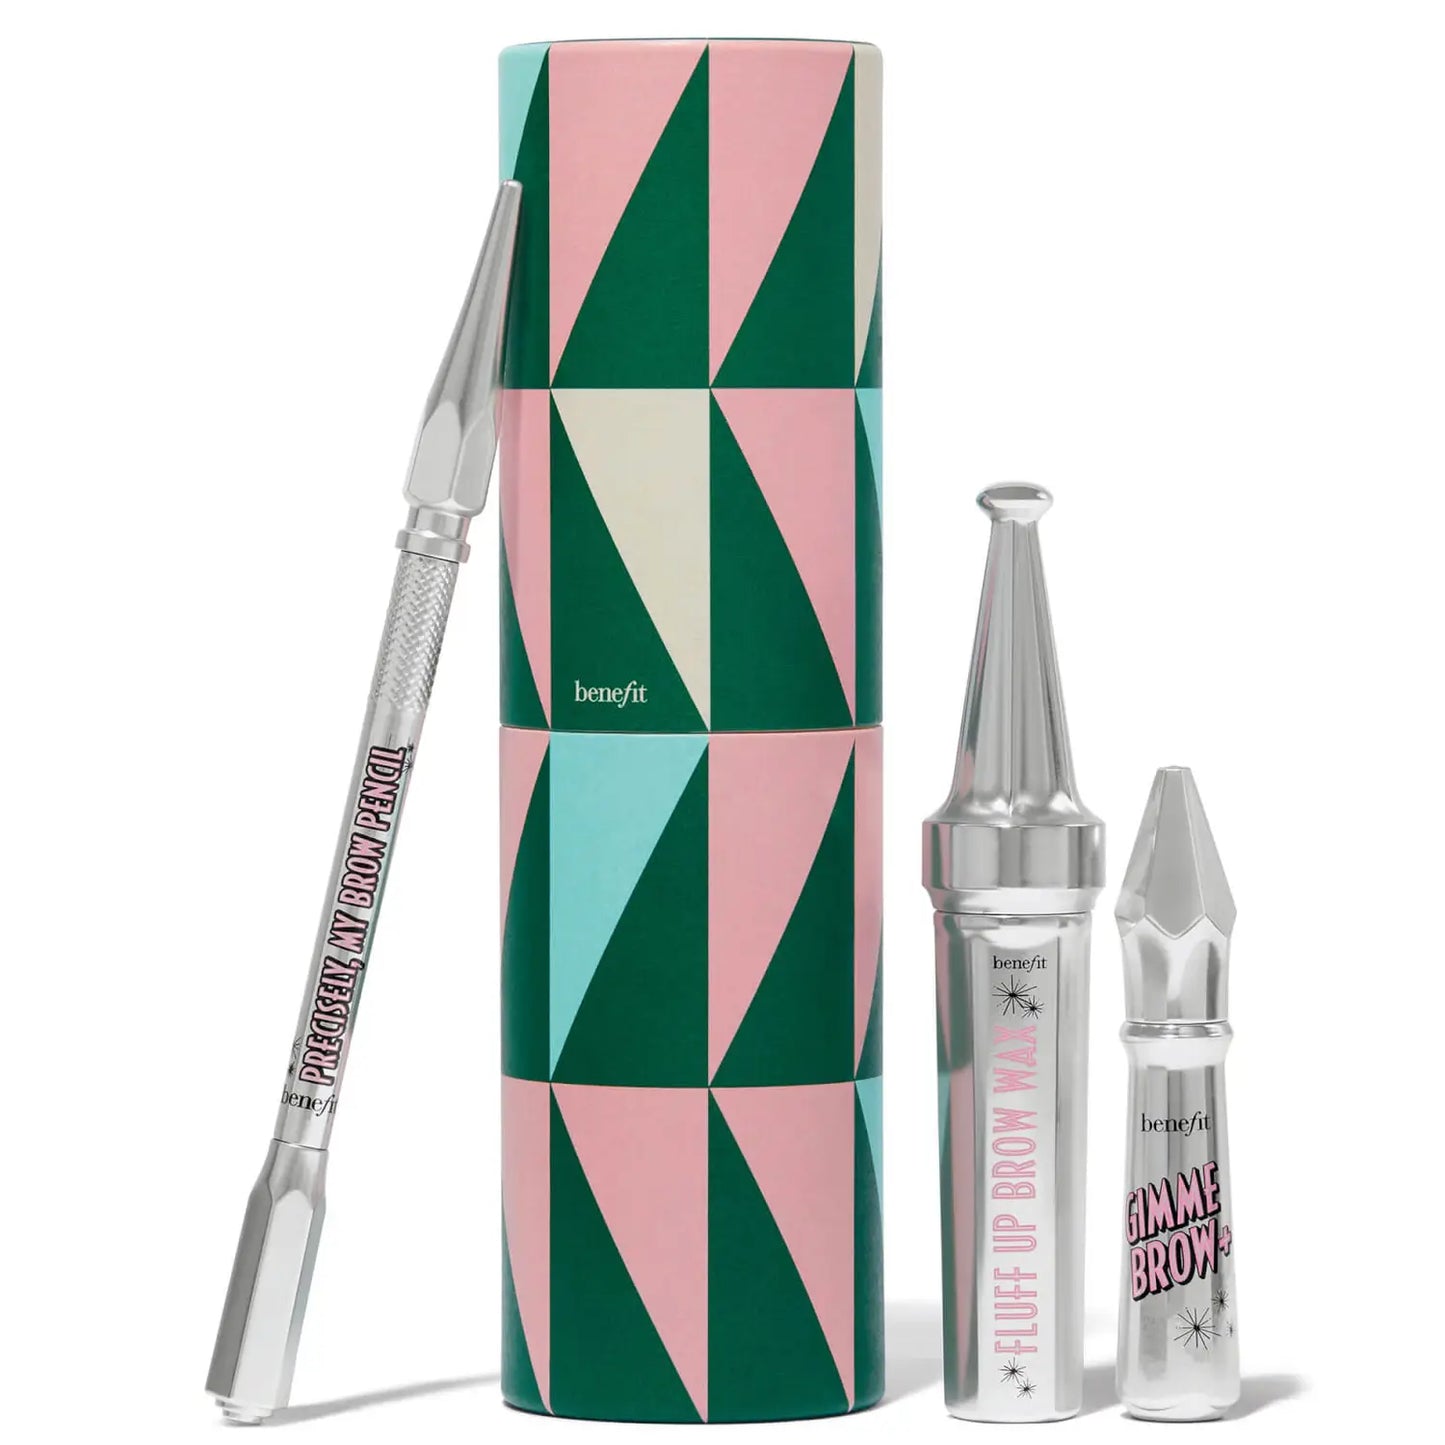 BENEFIT | FLUFFIN FESTIVE BROWS PRECISELY MY BROW PENCIL AND BROW GELS GIFT SET